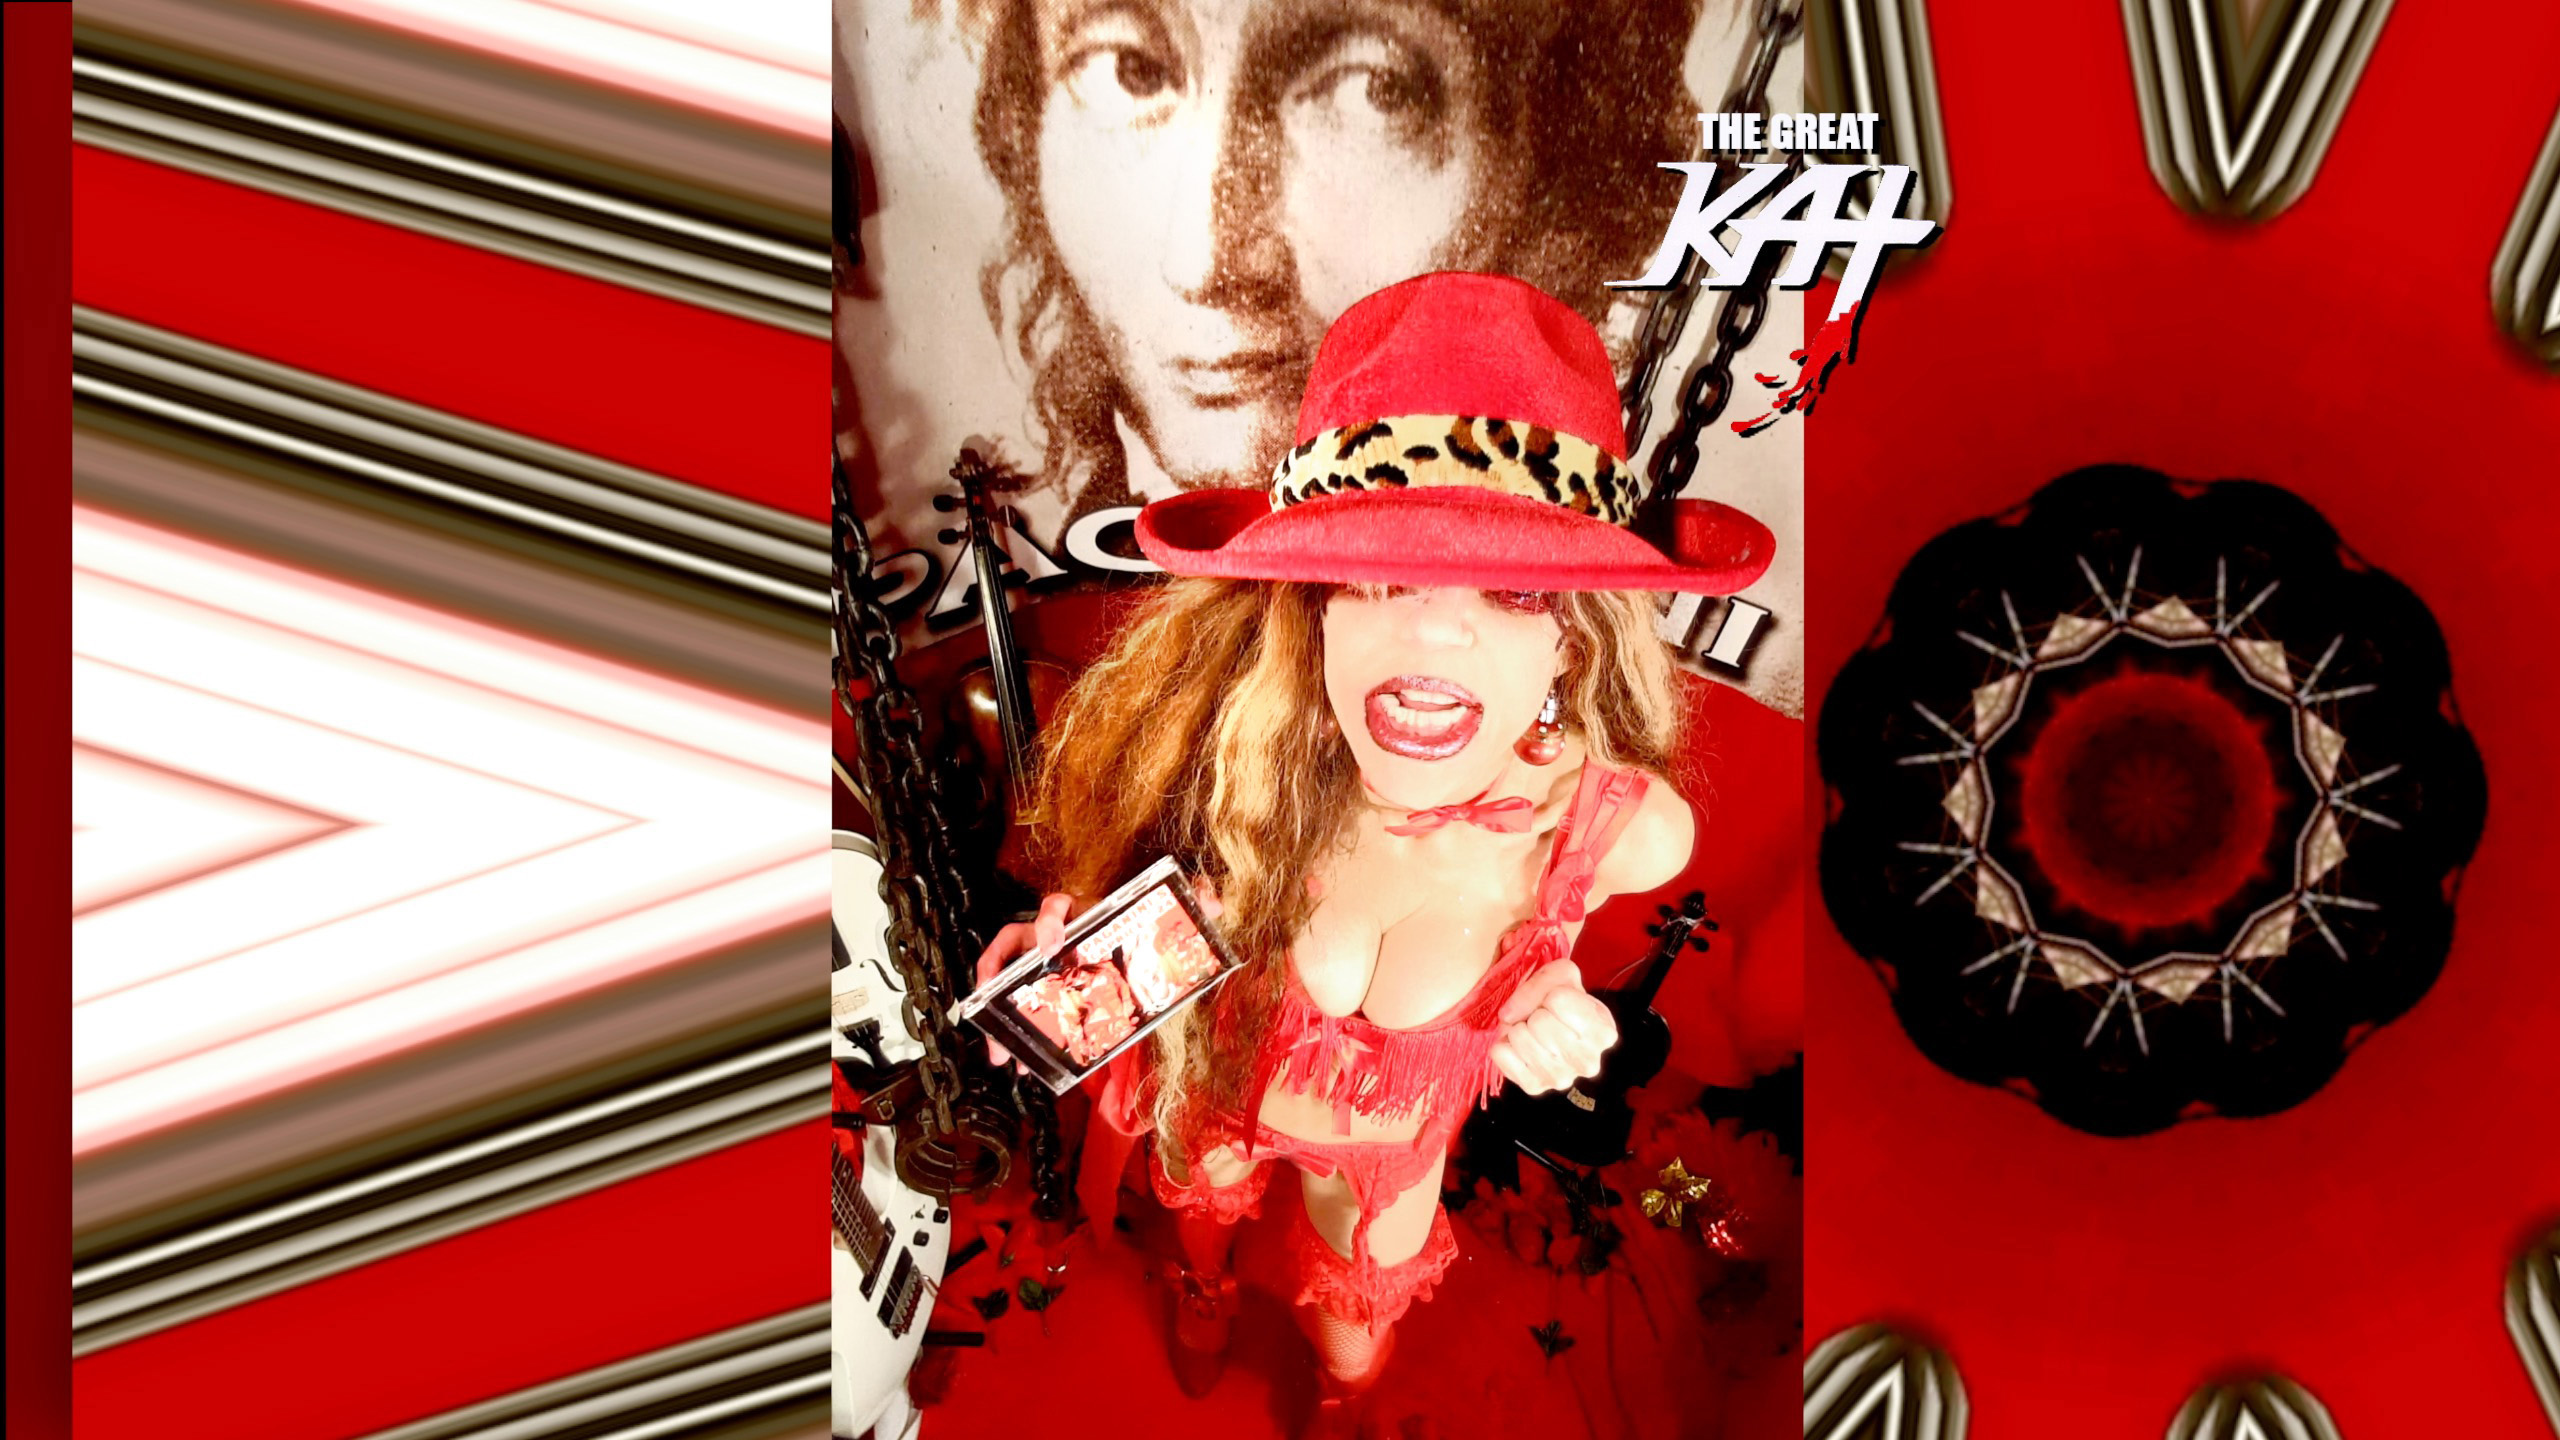 RED HOT SHREDDER! "PAGANINI'S CAPRICE #24 -THE GREAT KAT GUITAR/VIOLIN DOUBLE VIRTUOSO PROMO" VIDEO!